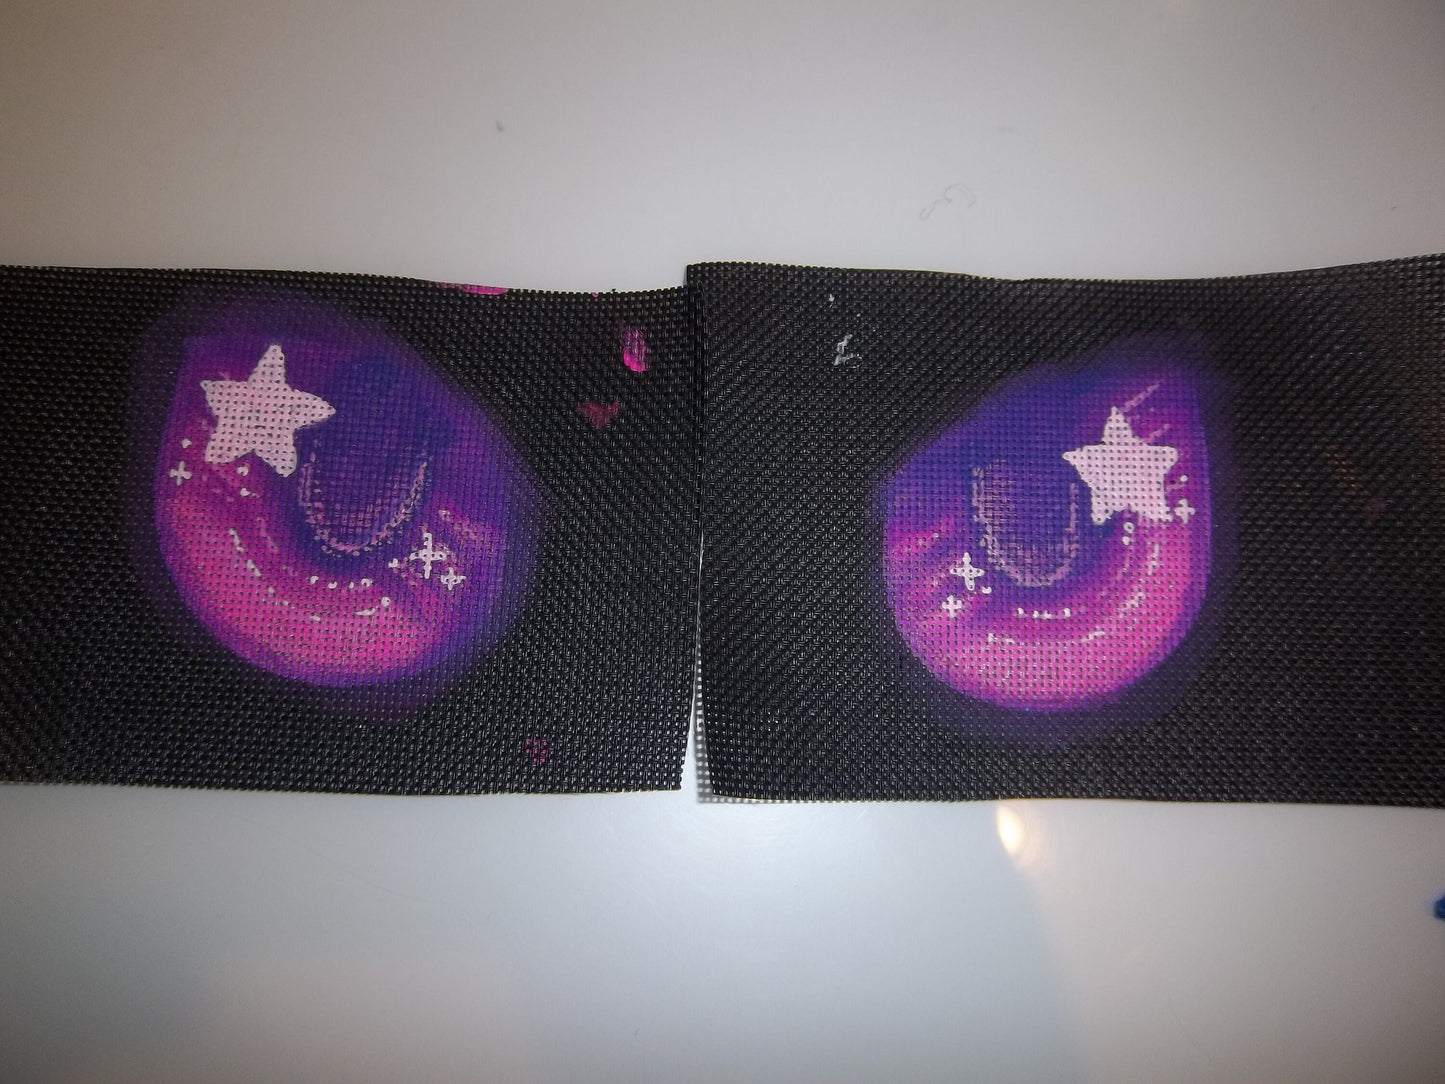 Fursuit / Costume Eye Mesh (Lots of Colors!) - Waterproof Durable Canvas / Perforated Mesh - 8.5x11 - NO TRACKING